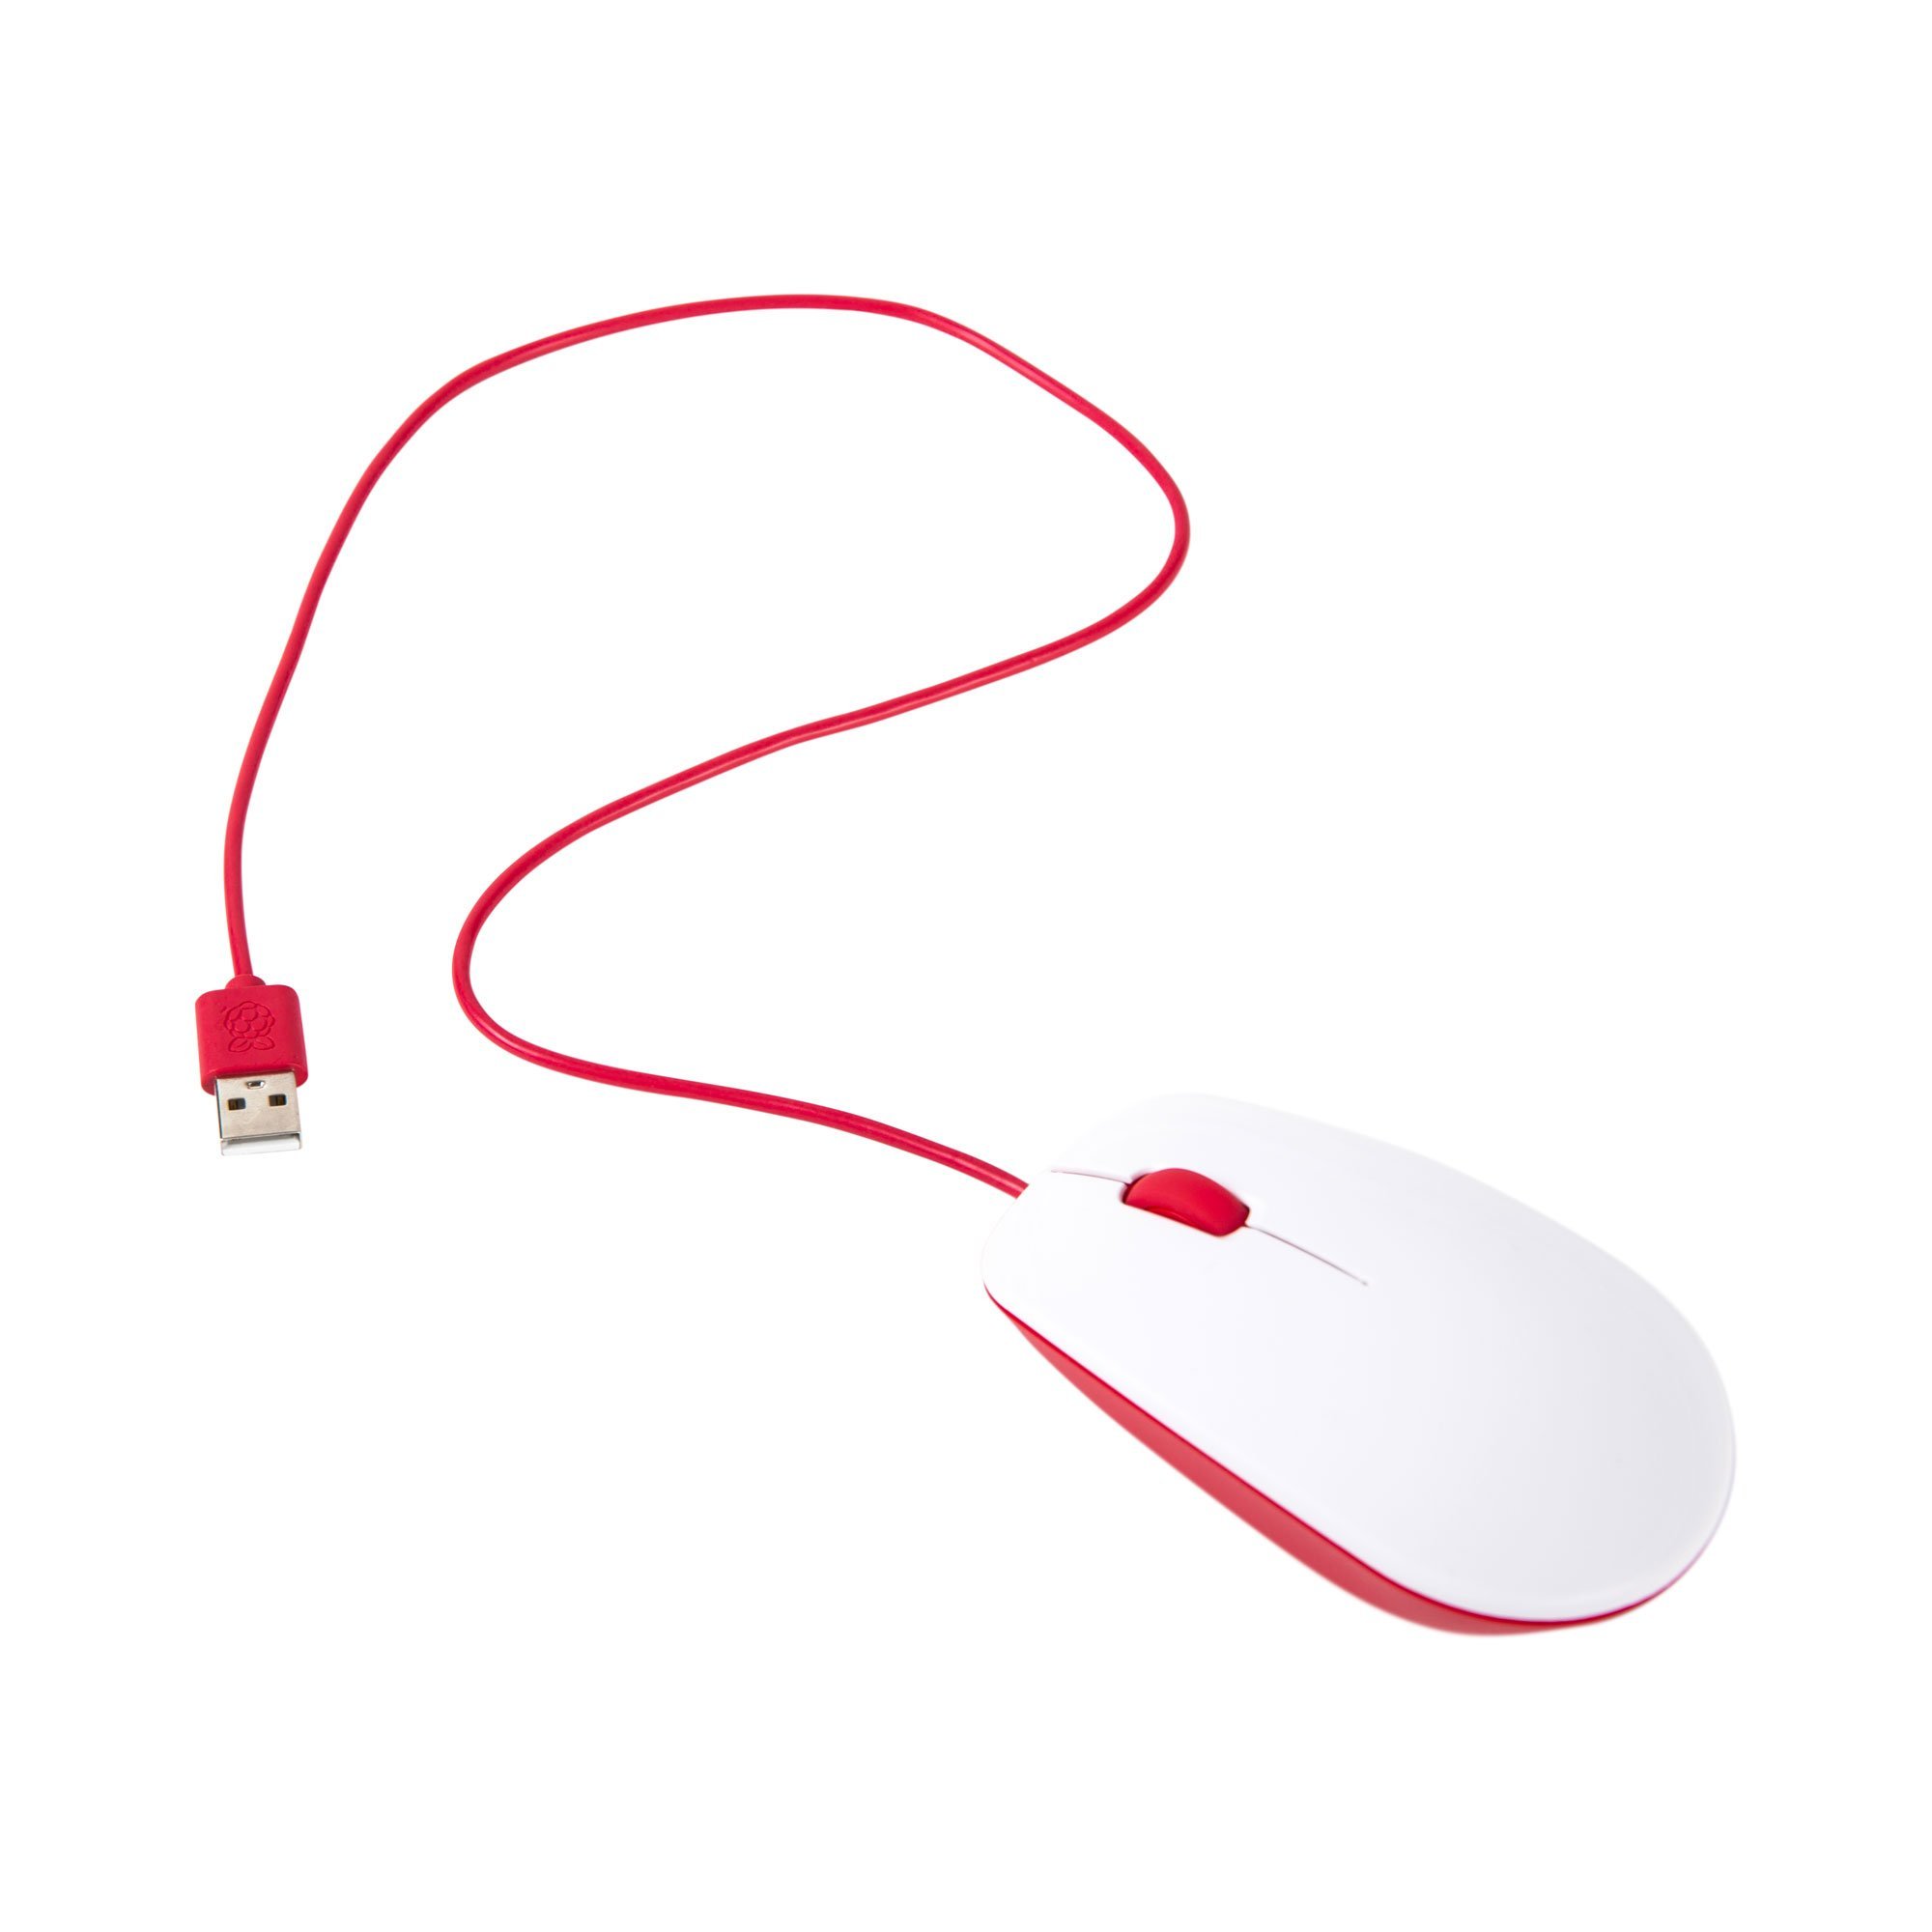 00_Red_White-Mouse.jpg